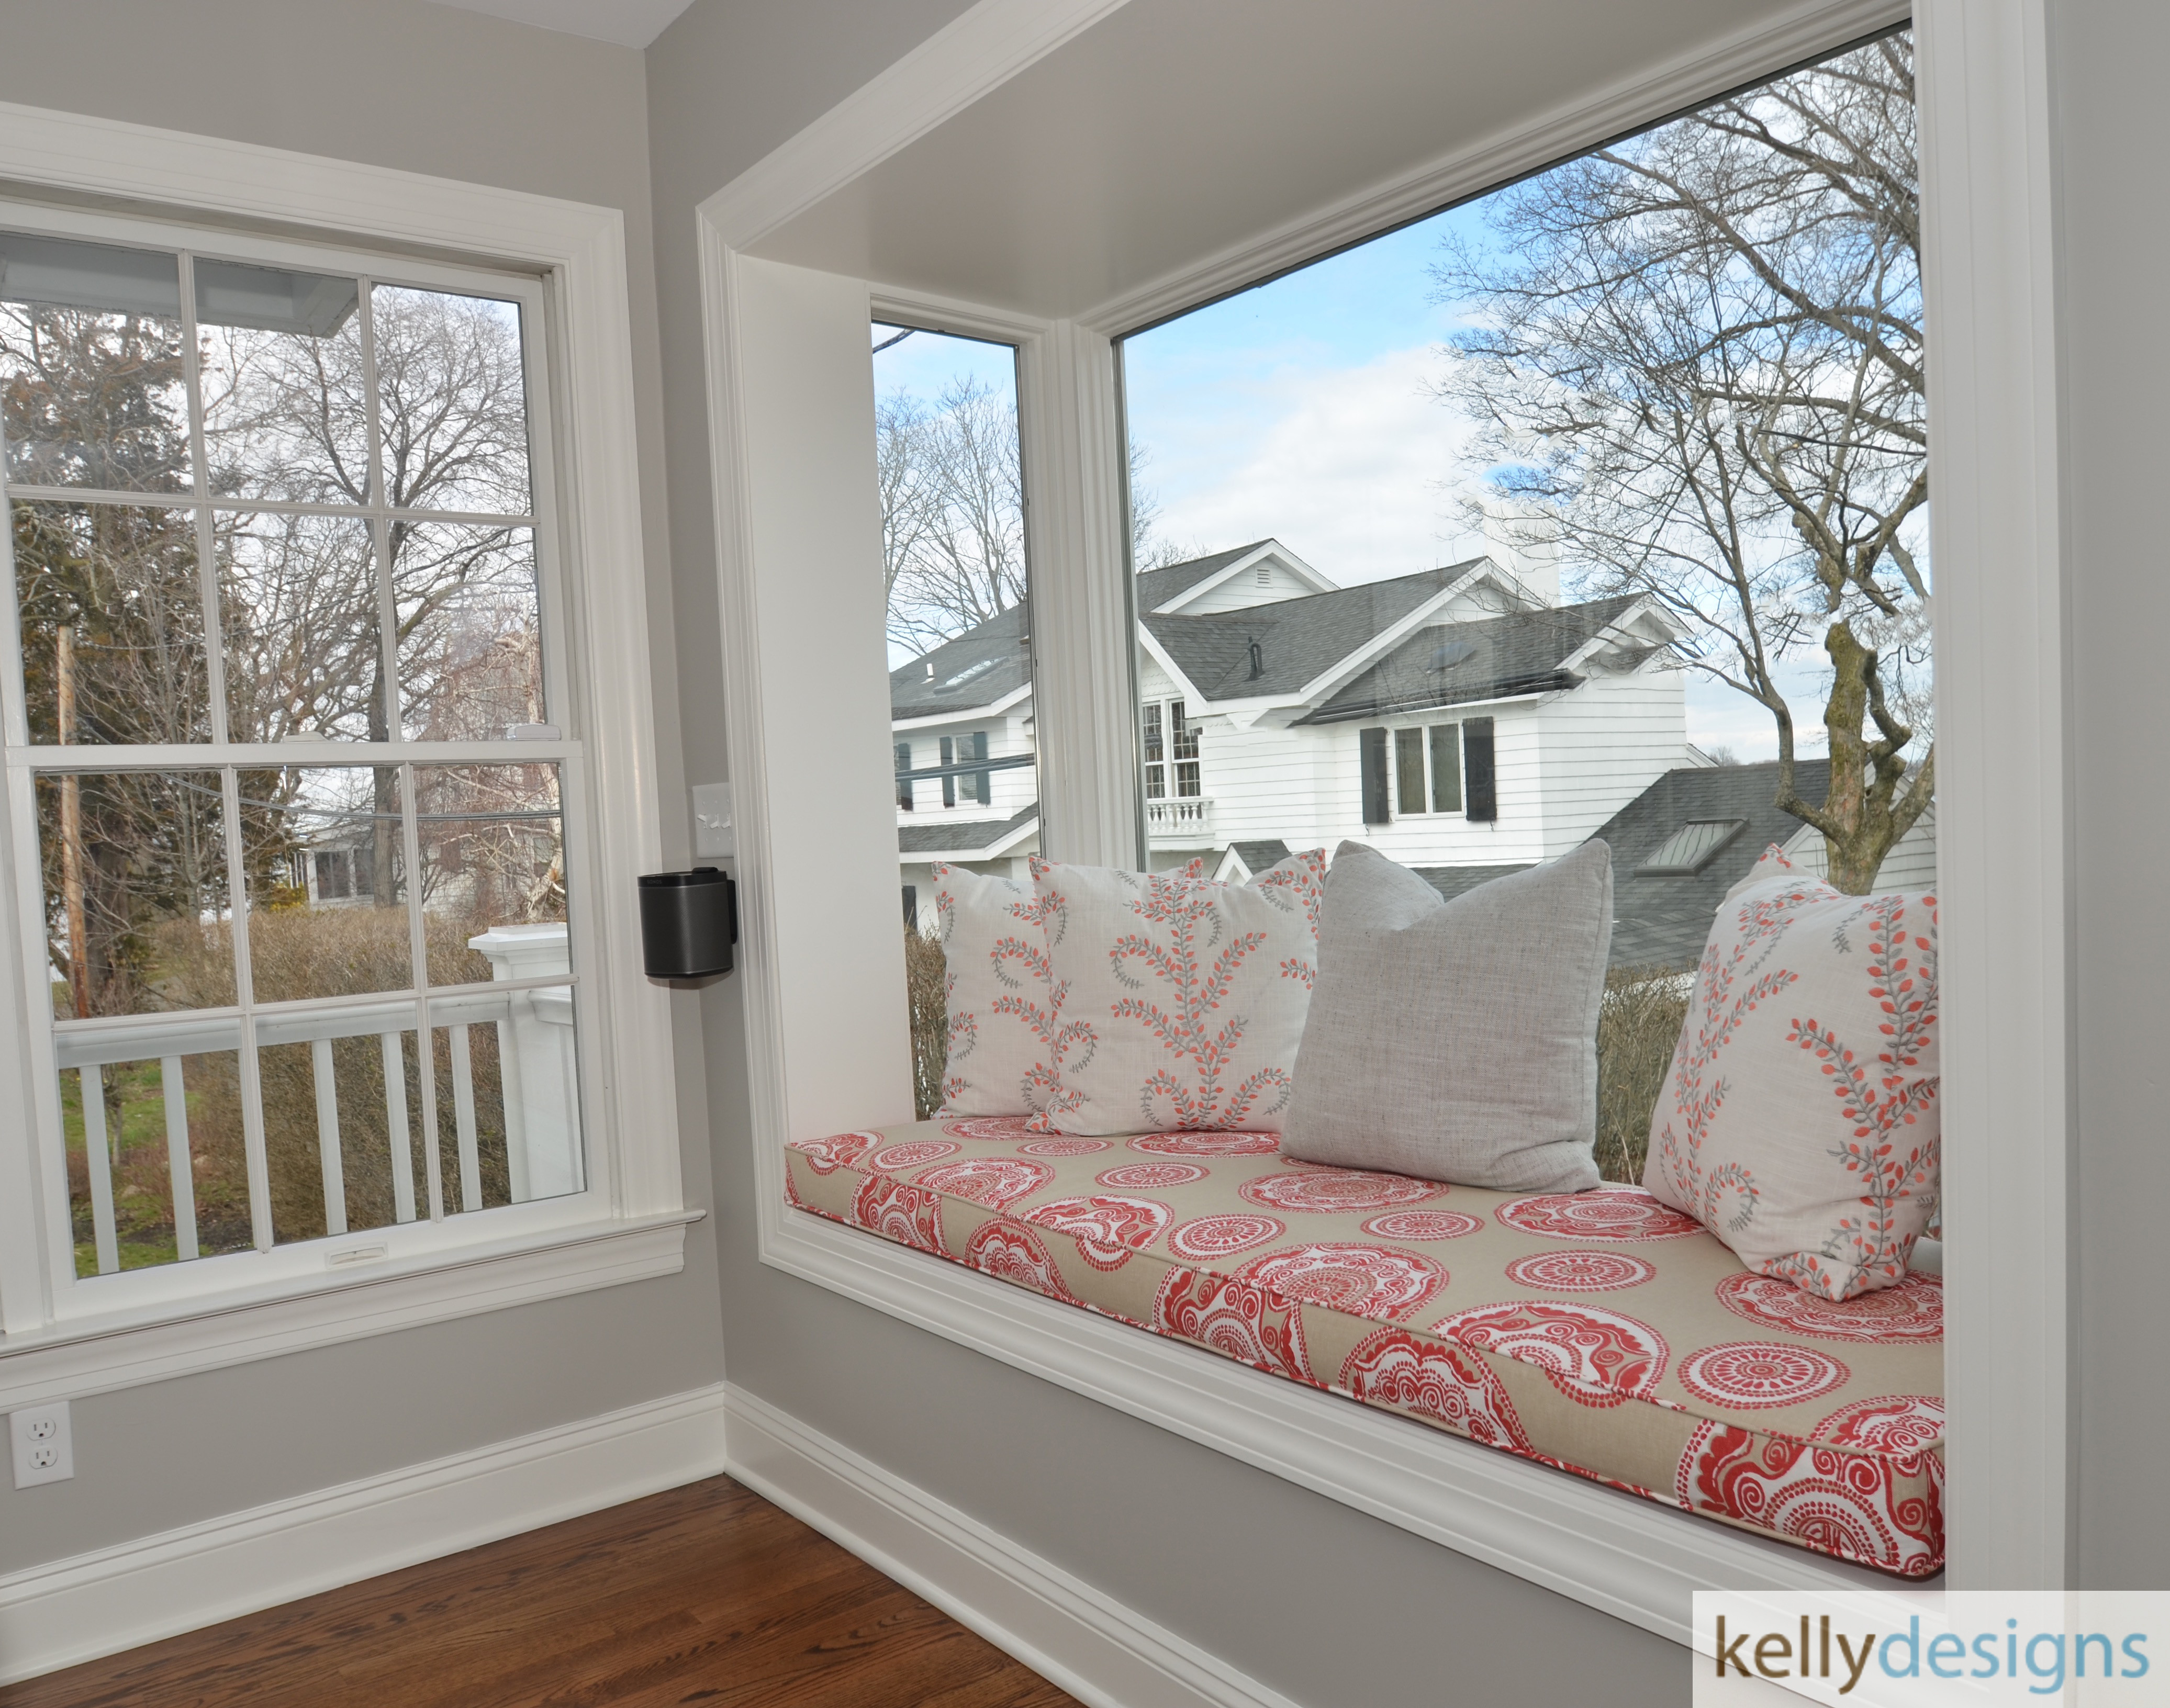 Added window seat for cozy reading nook!  - Interior Design By kellydesigns